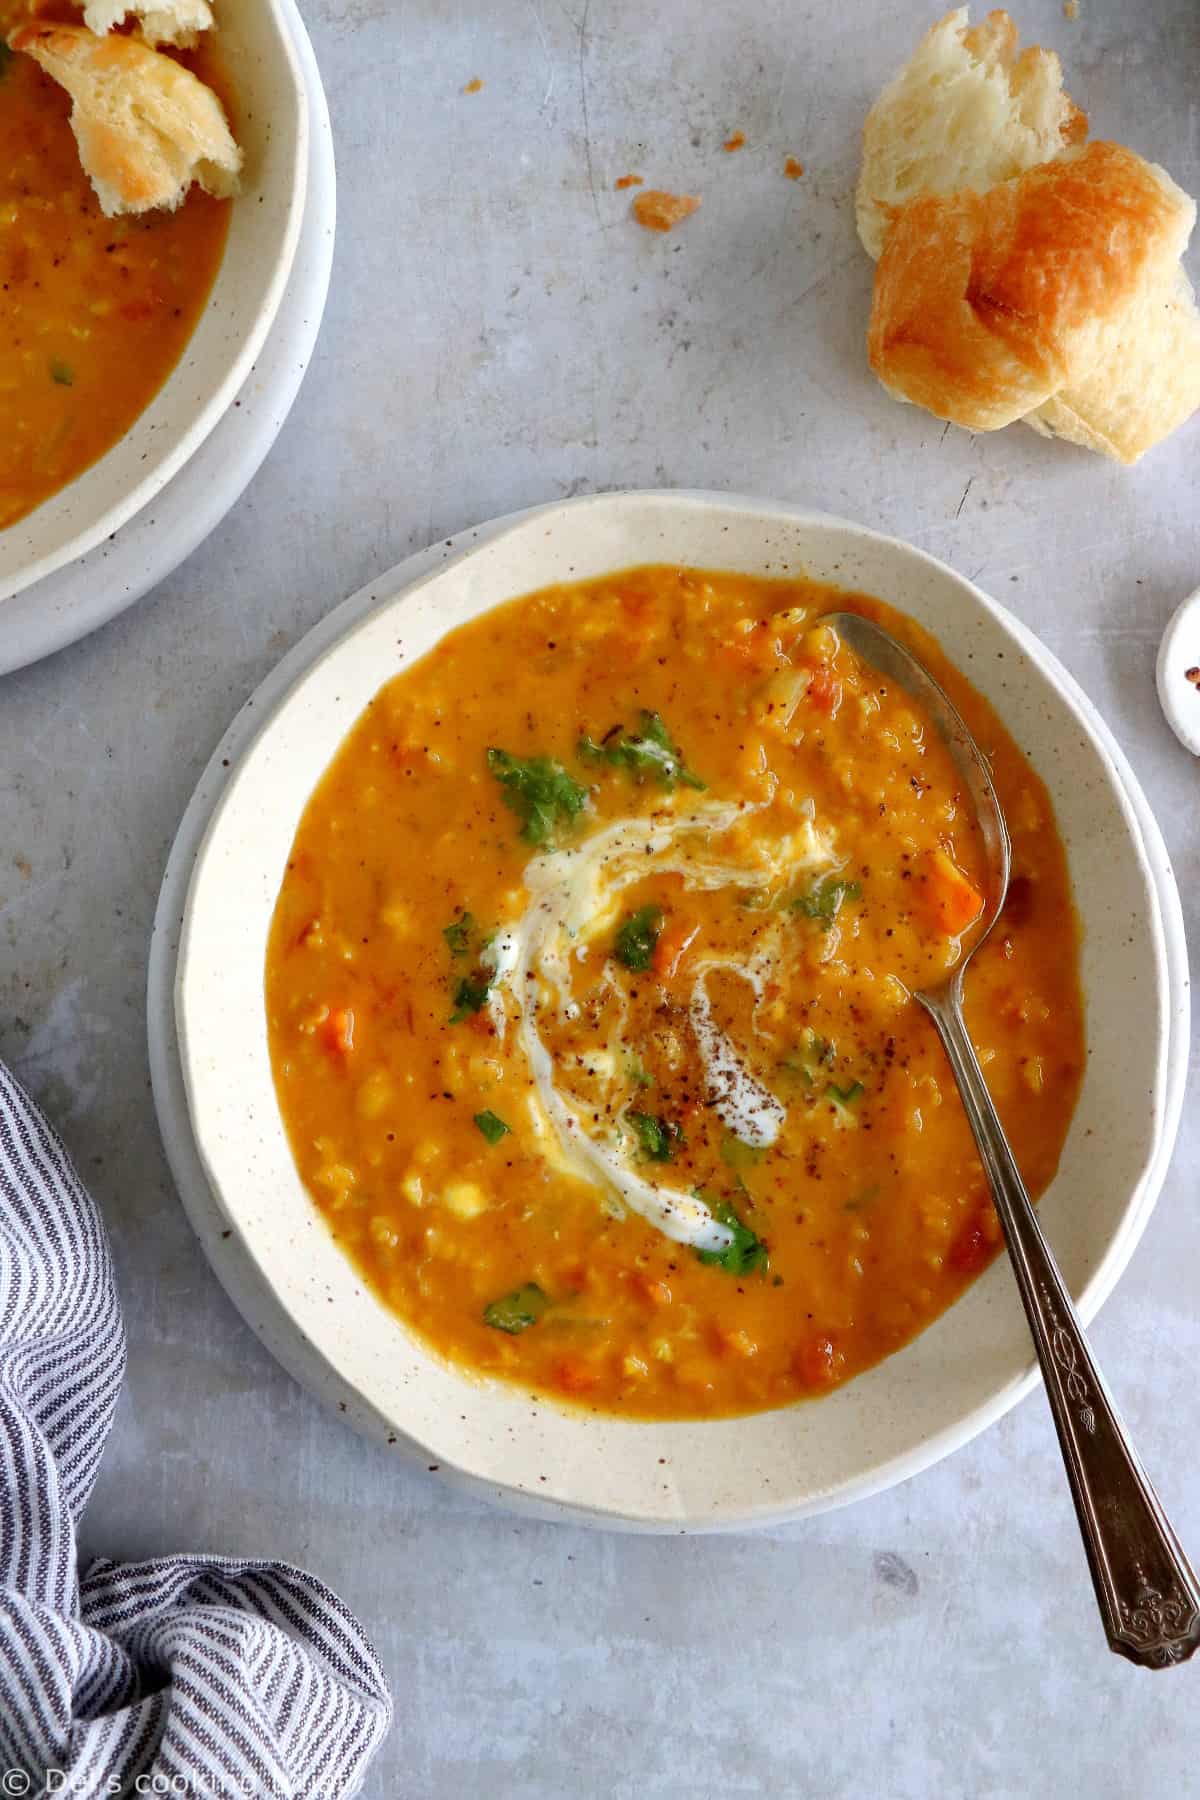 This curried red lentil and split pea soup is easy to make, loaded with warm and comforting flavors, with just a little bit of texture to it.